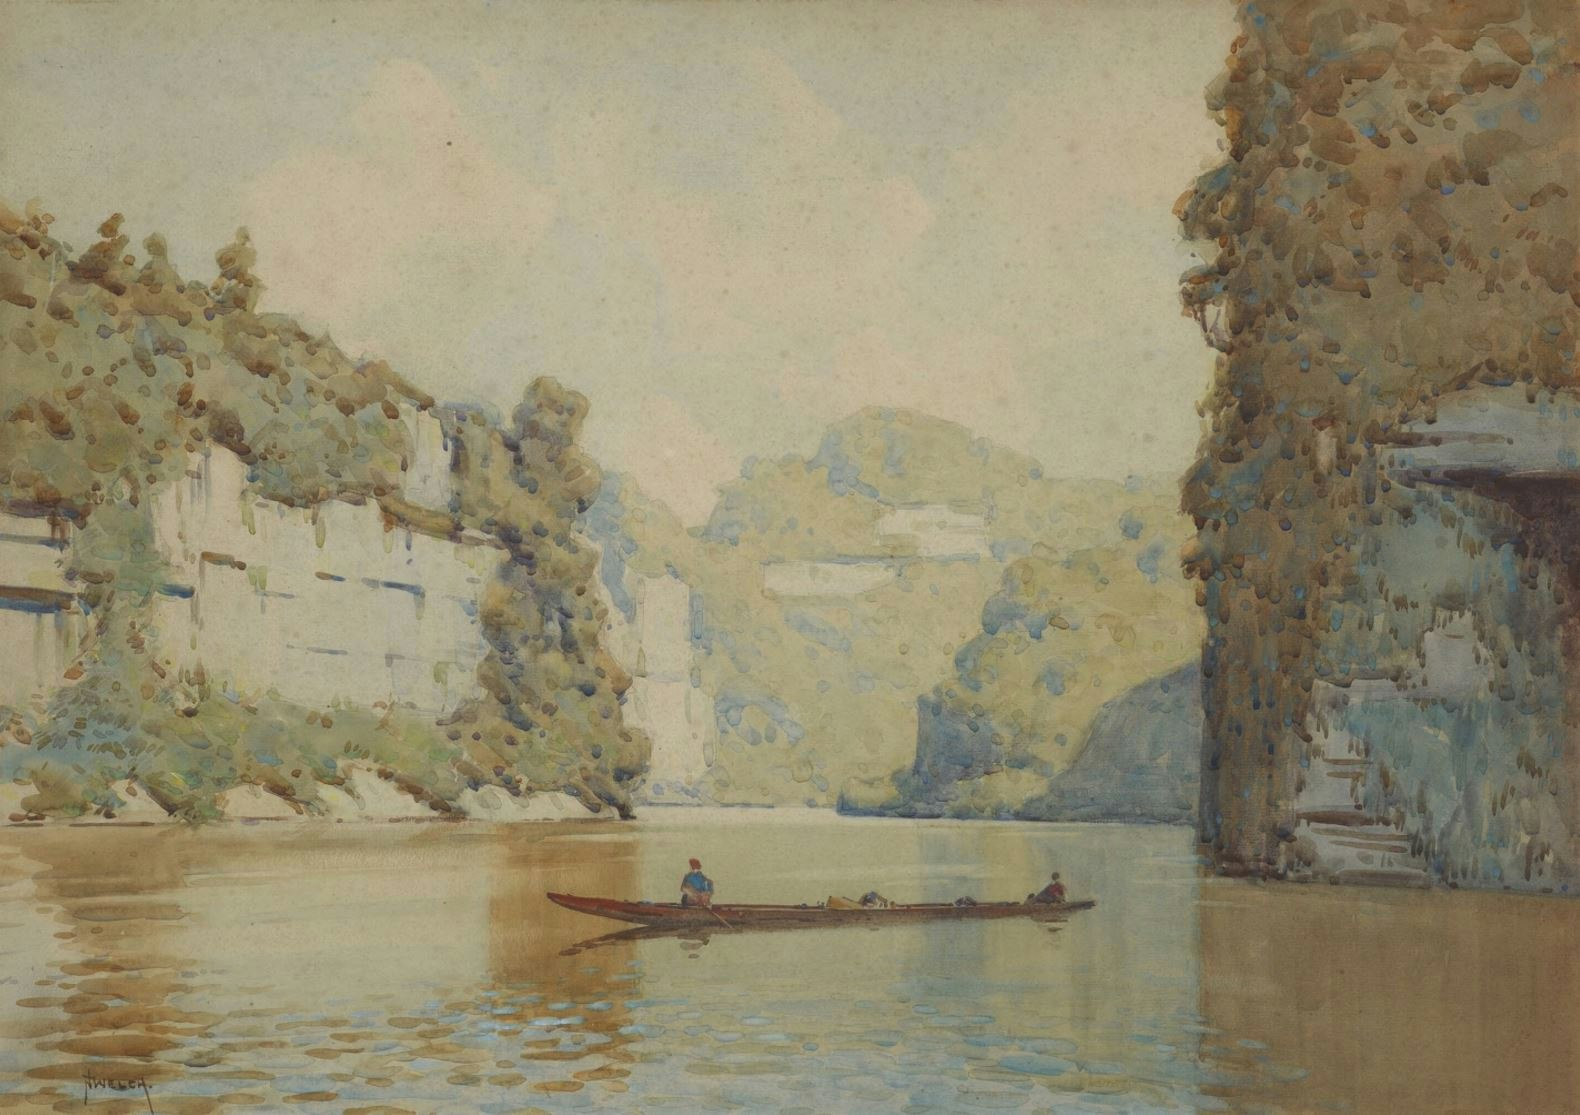 Watercolour of a river and a boat